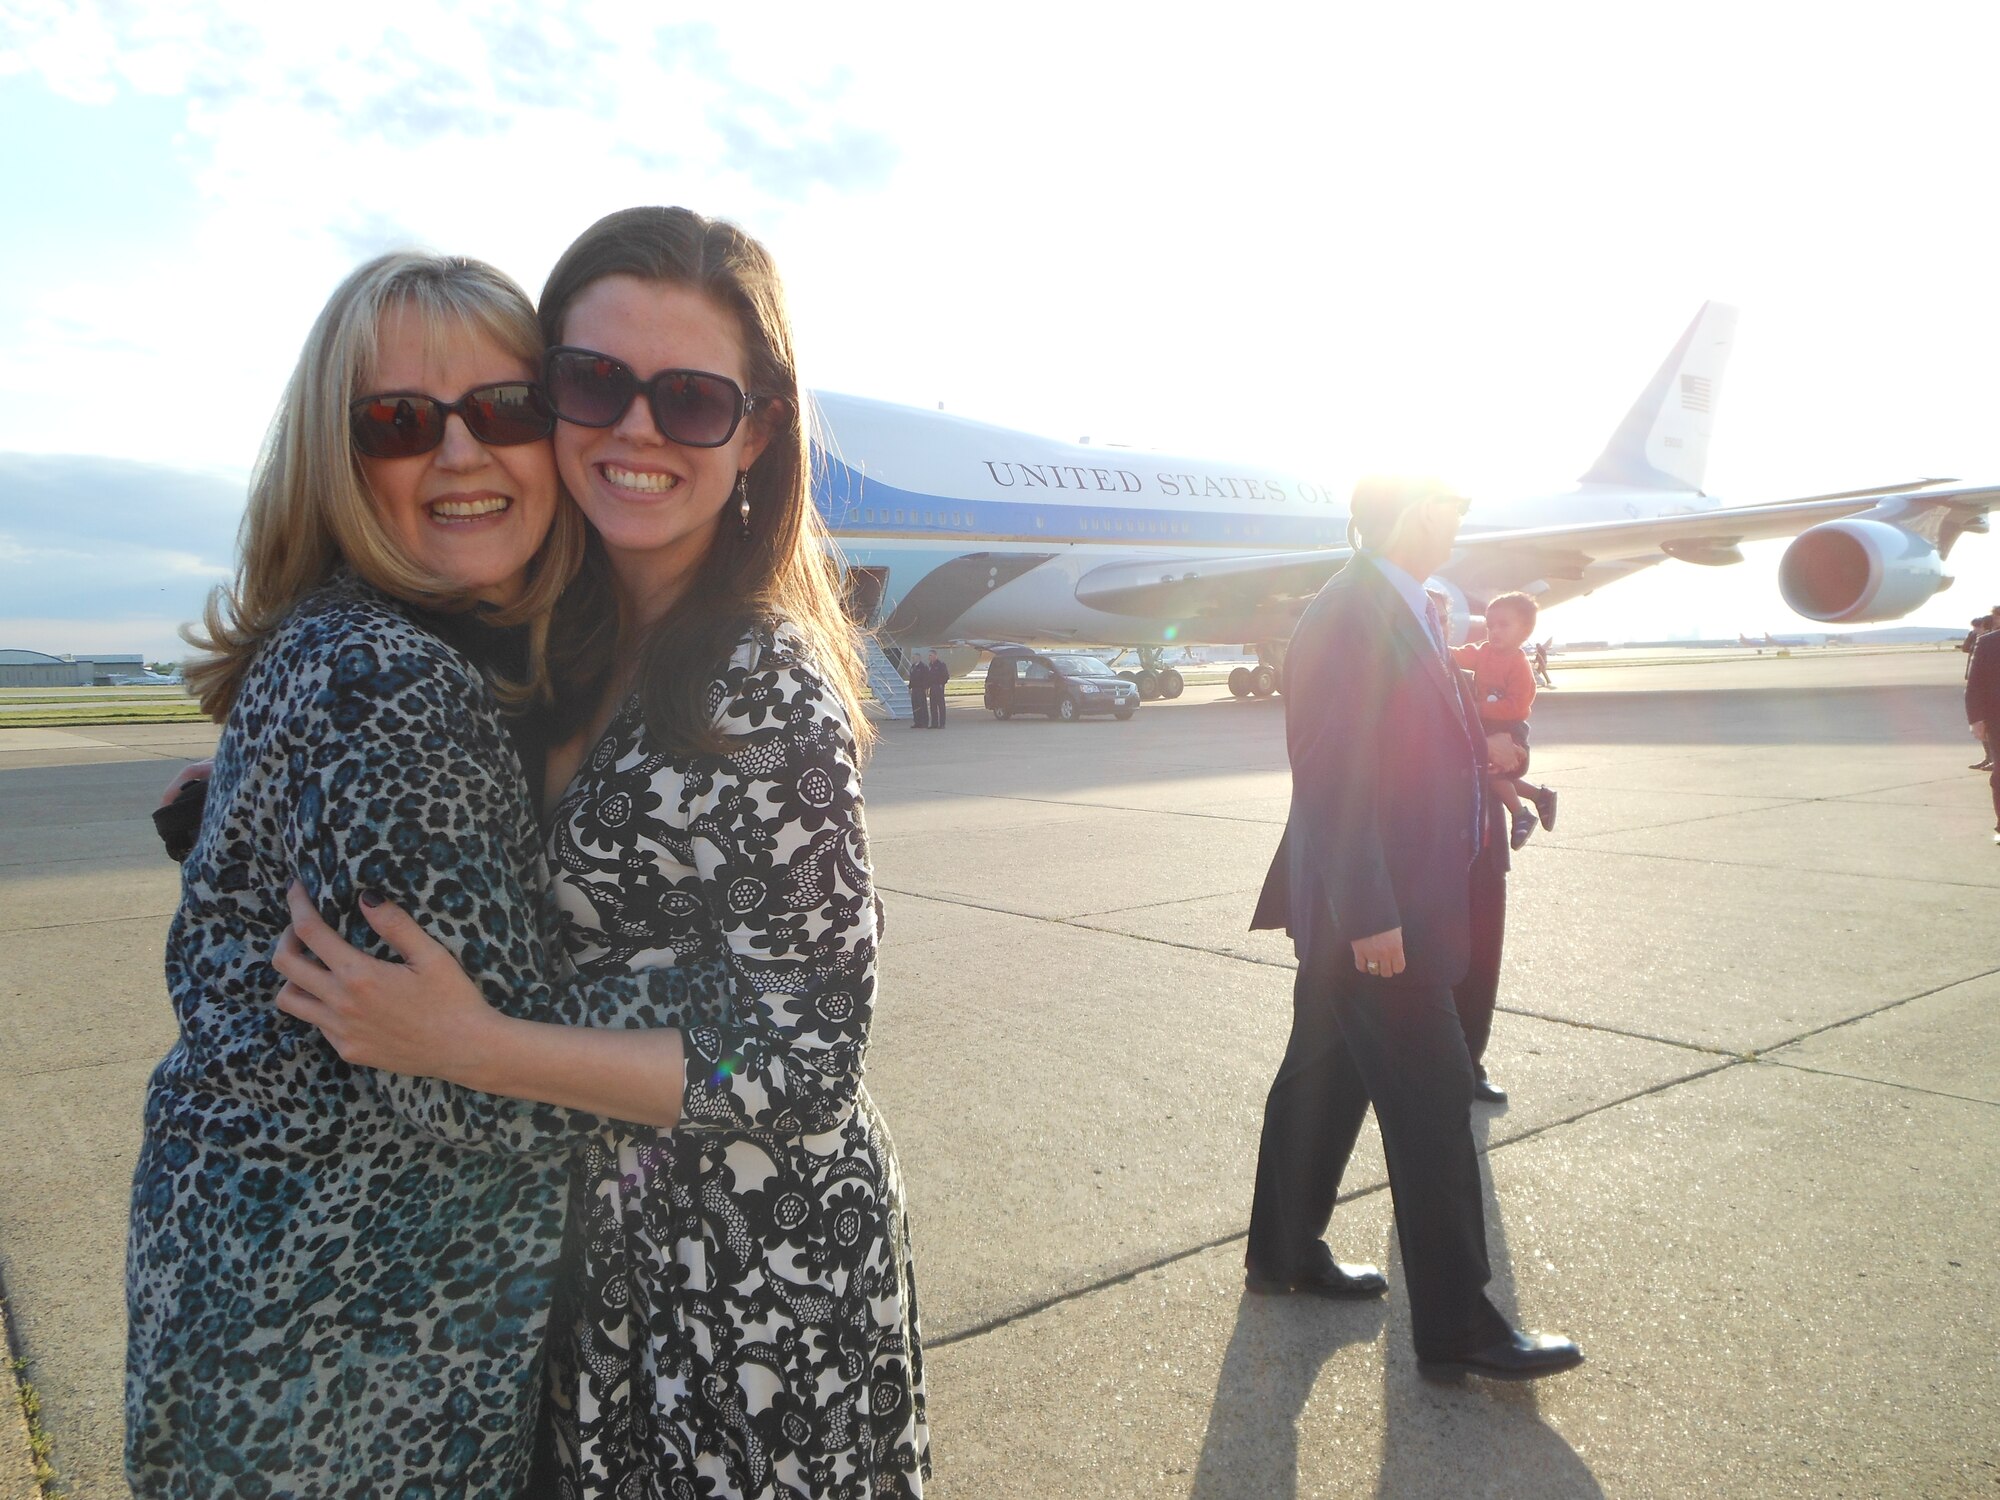 Senior Airman Katie Johnson and her mother Carolyn Maricle receive the President of the United States at Dallas/Love Field Airport, Texas April 17, 2013 before the opening of the George W. Bush presidential library. 